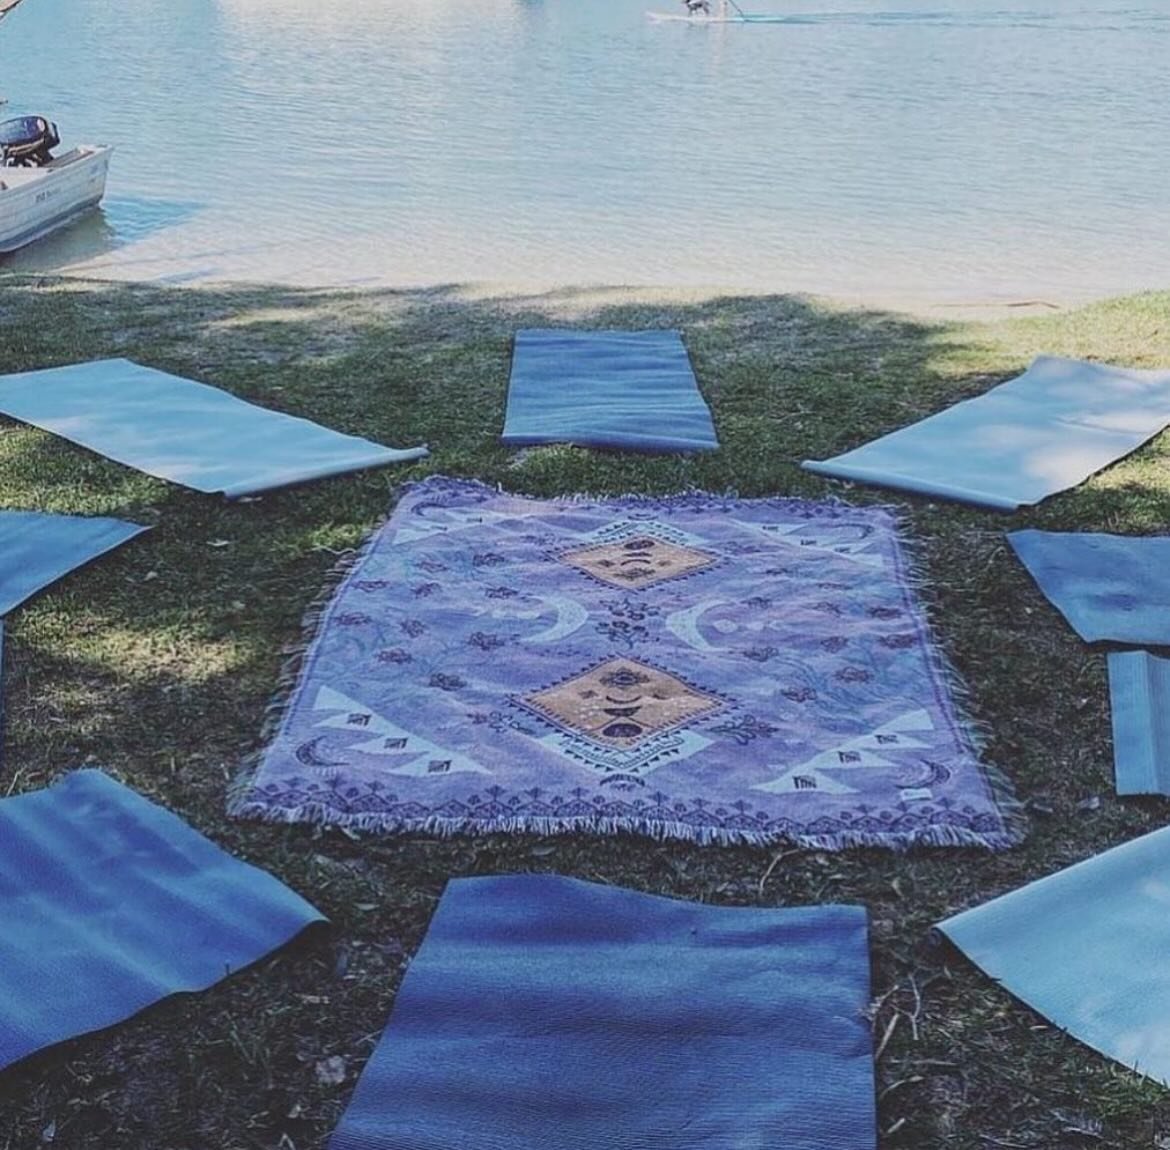 &bull; STRETCH by the sea&bull; 

Join us for some outdoor yoga. All levels, all bodies welcome. First Nations folk and children 12 and under come for free 🌈 Mats supplied. 

Join Anto THURSDAY at 9:30am in Noosa Woods. @antomunozcaceres 

$25. Book